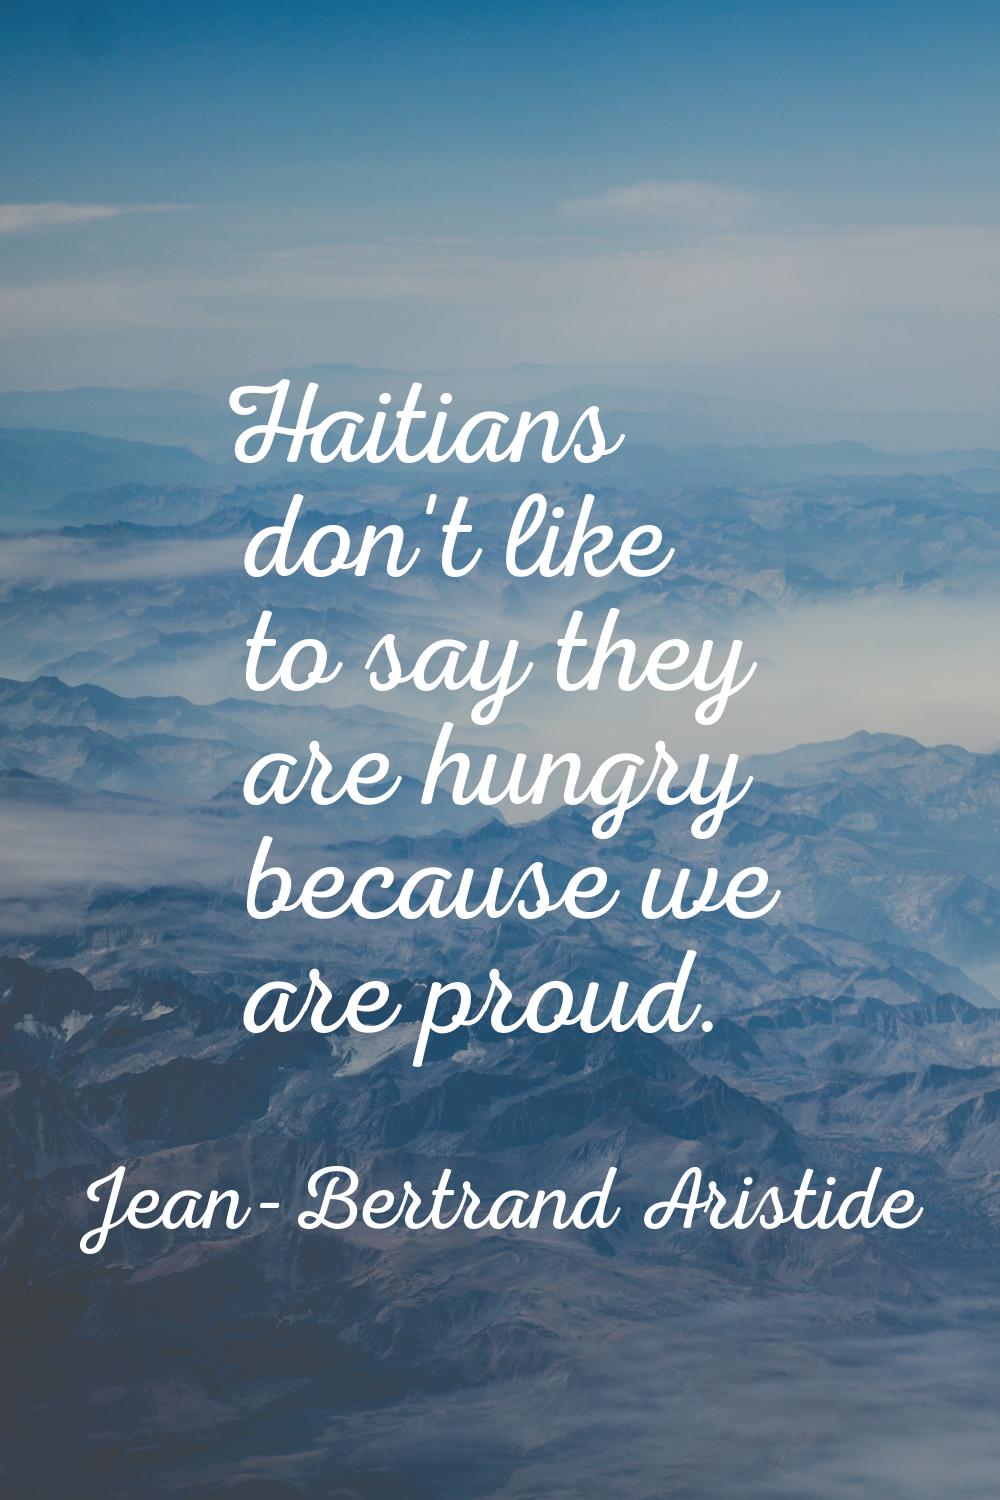 Haitians don't like to say they are hungry because we are proud.